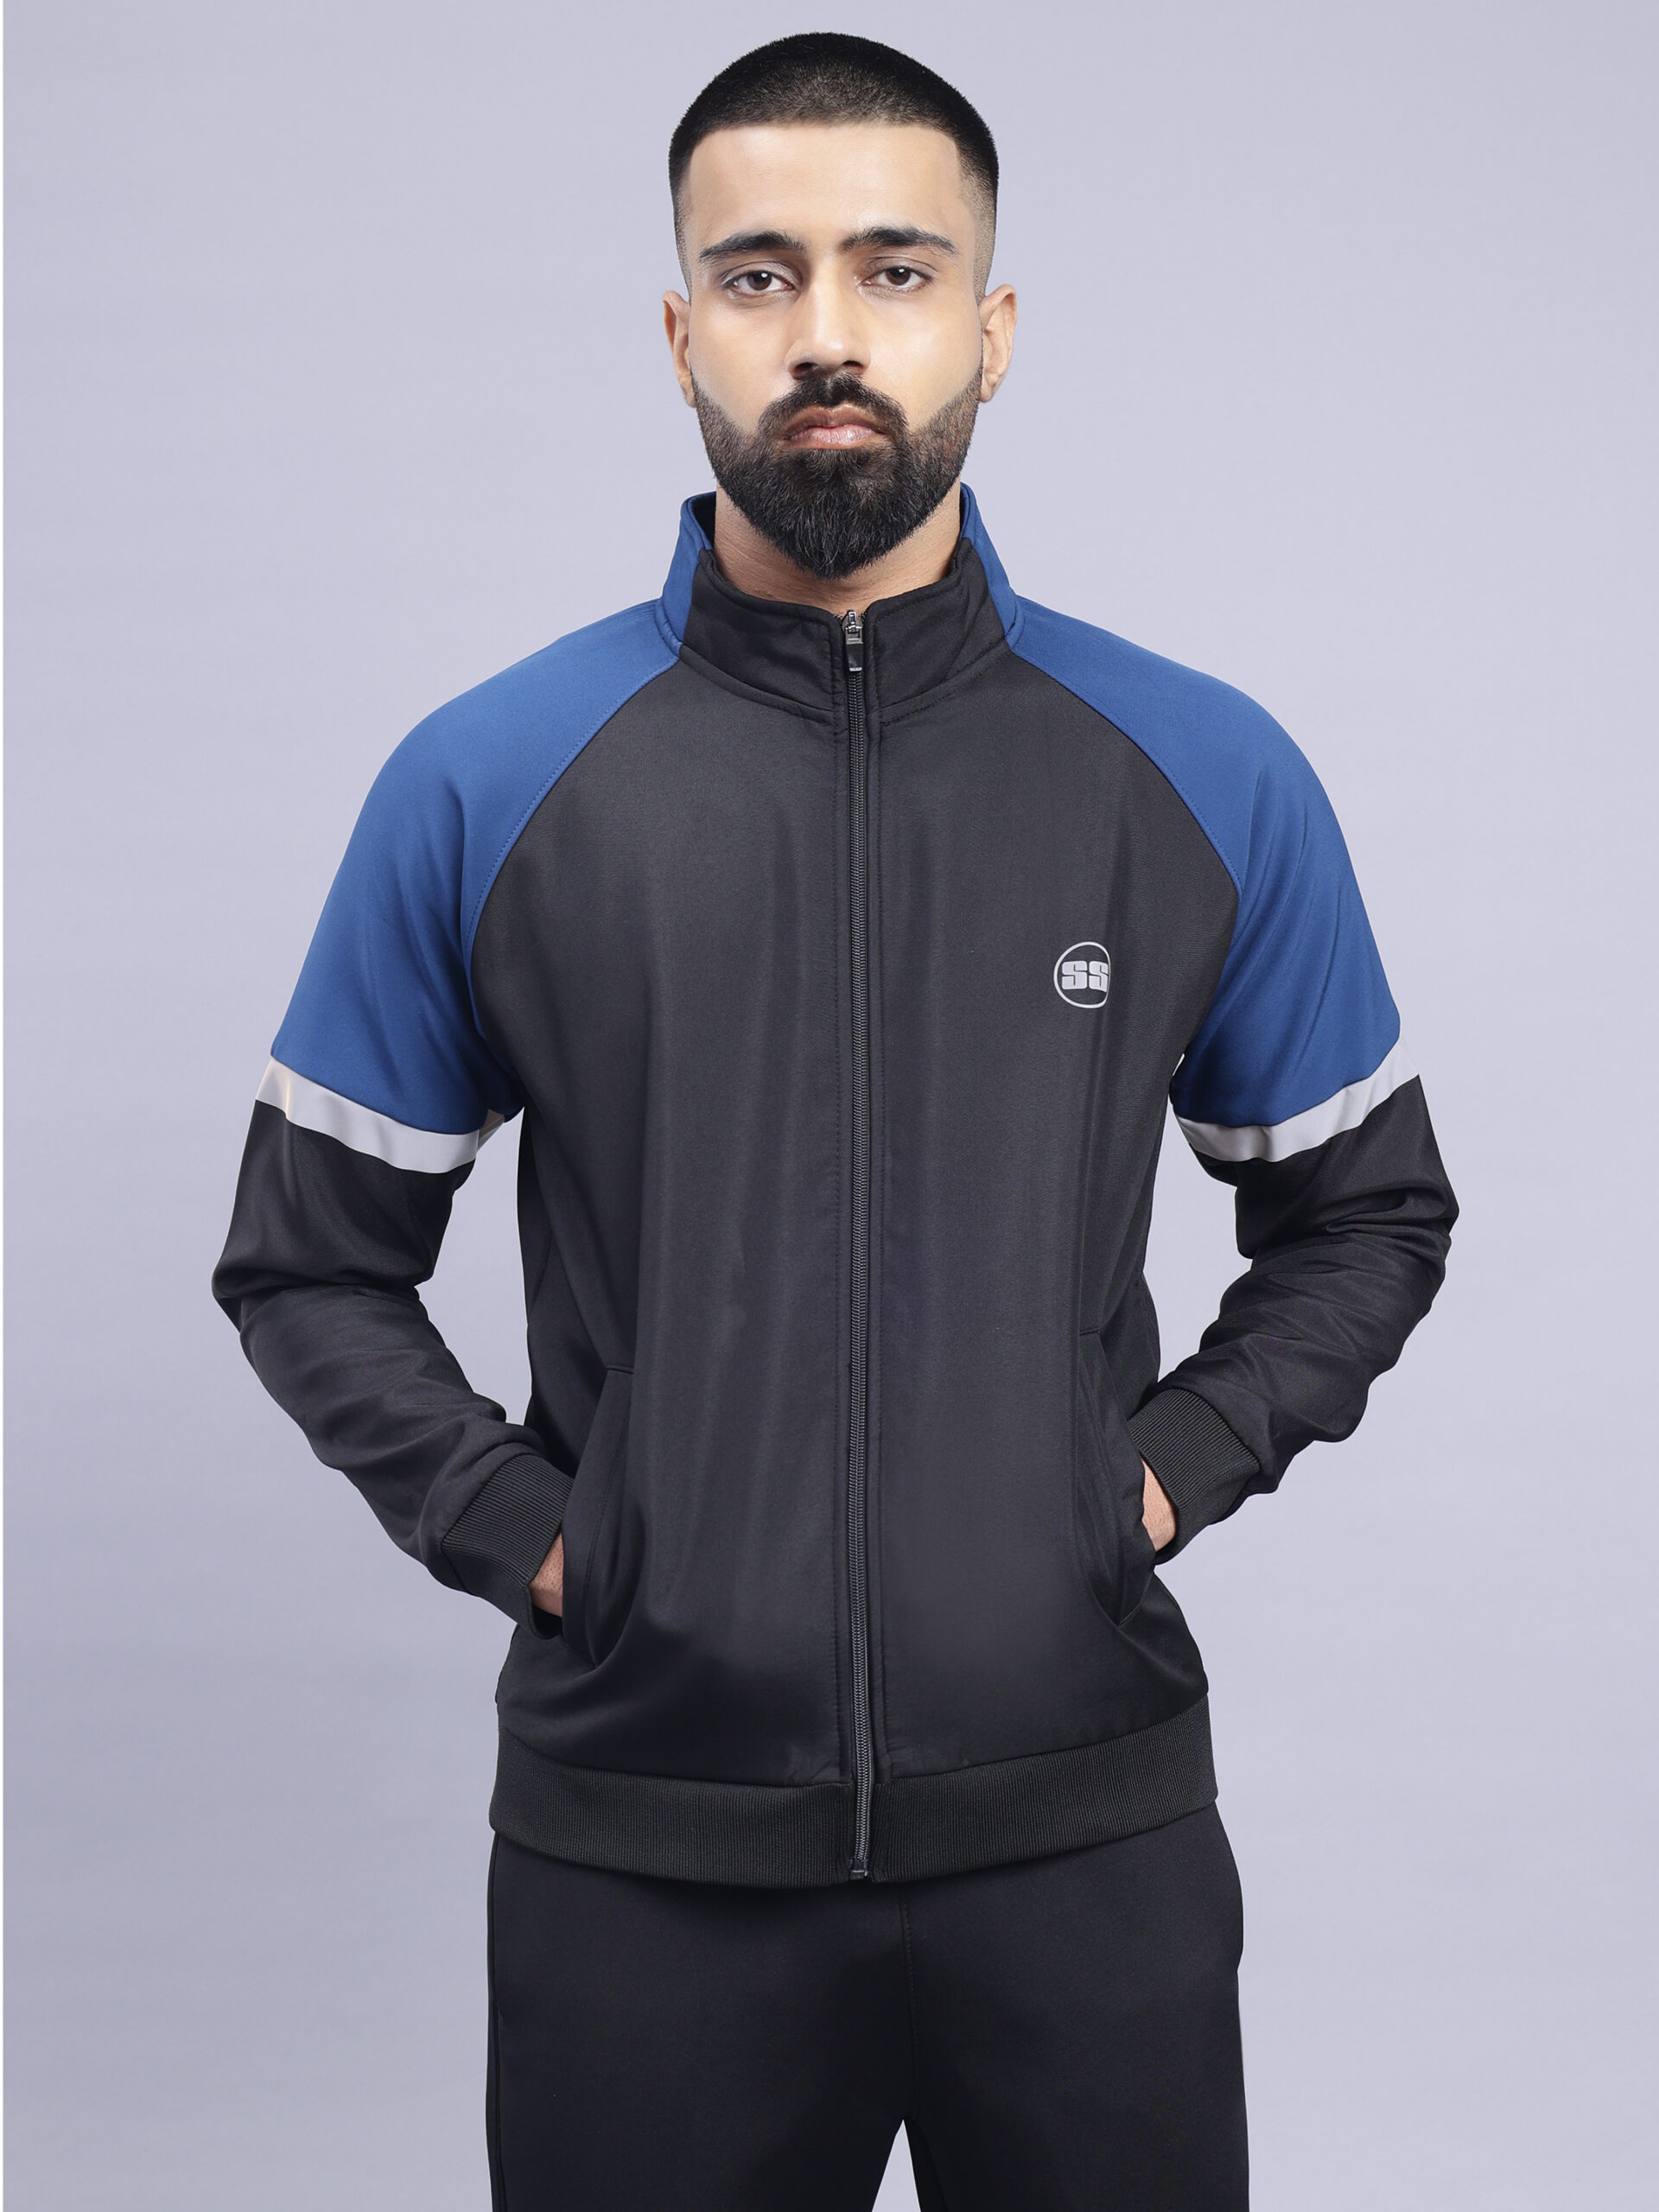 SS Professional Jacket for Men (Black with AirForce Blue) - SS Cricket